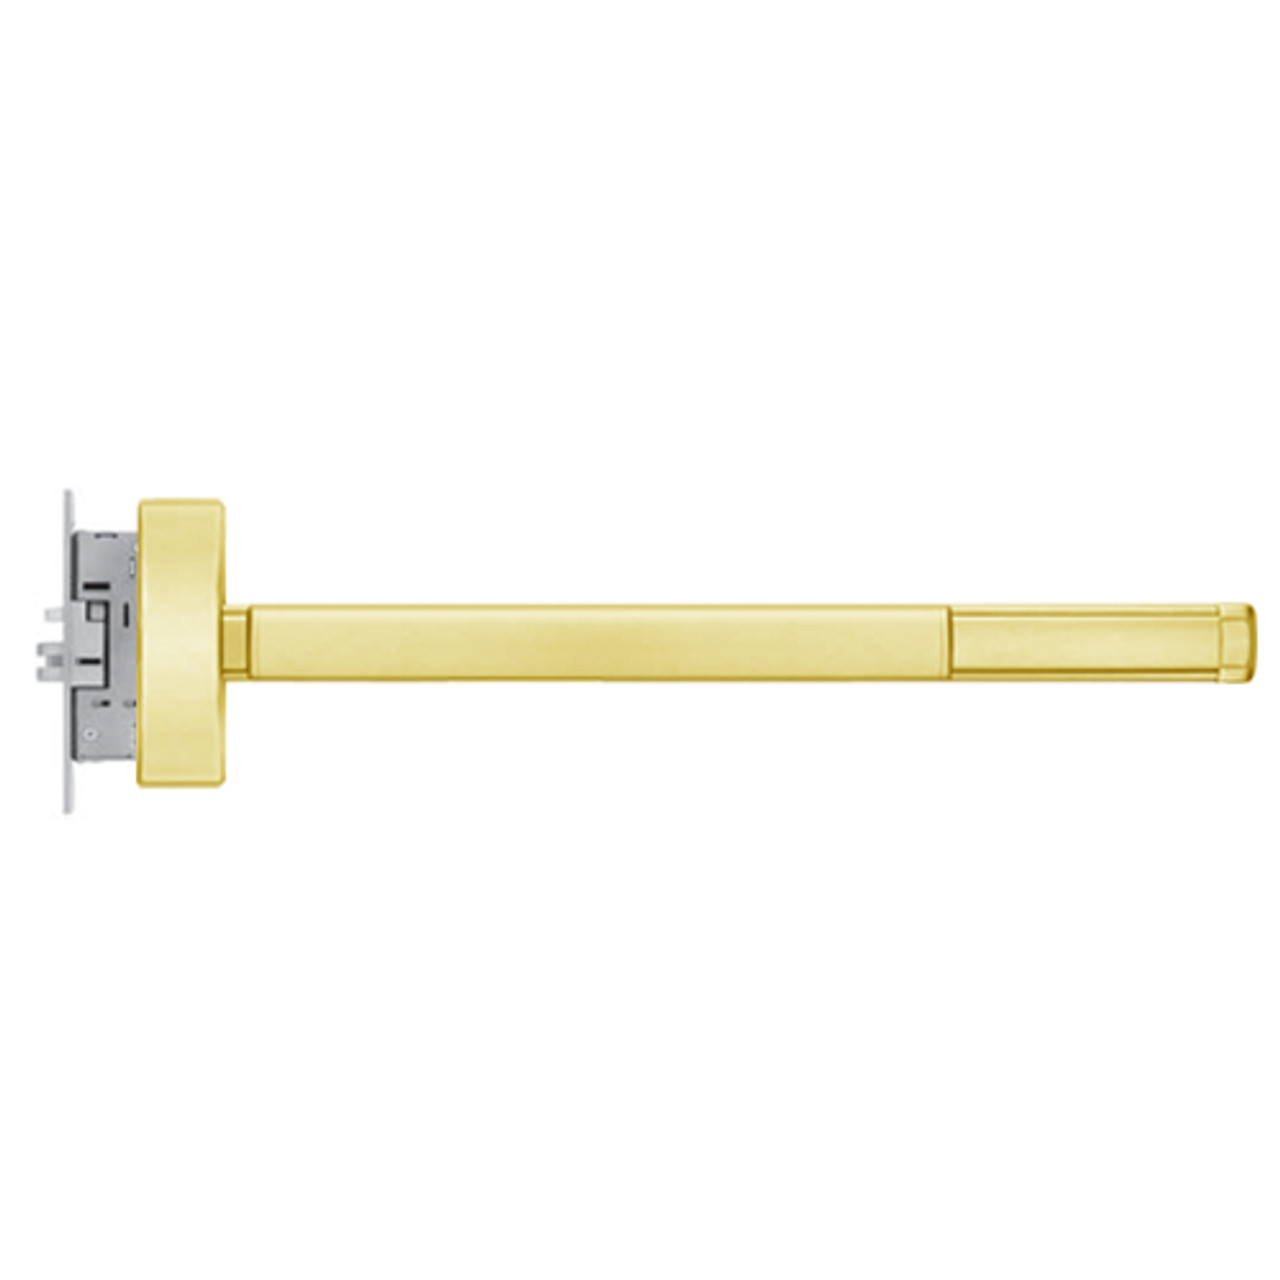 ELR2305-LHR-605-48 PHI 2300 Series Apex Mortise Exit Device with Electric Latch Retraction Prepped for Key Controls Thumb Piece in Bright Brass Finish